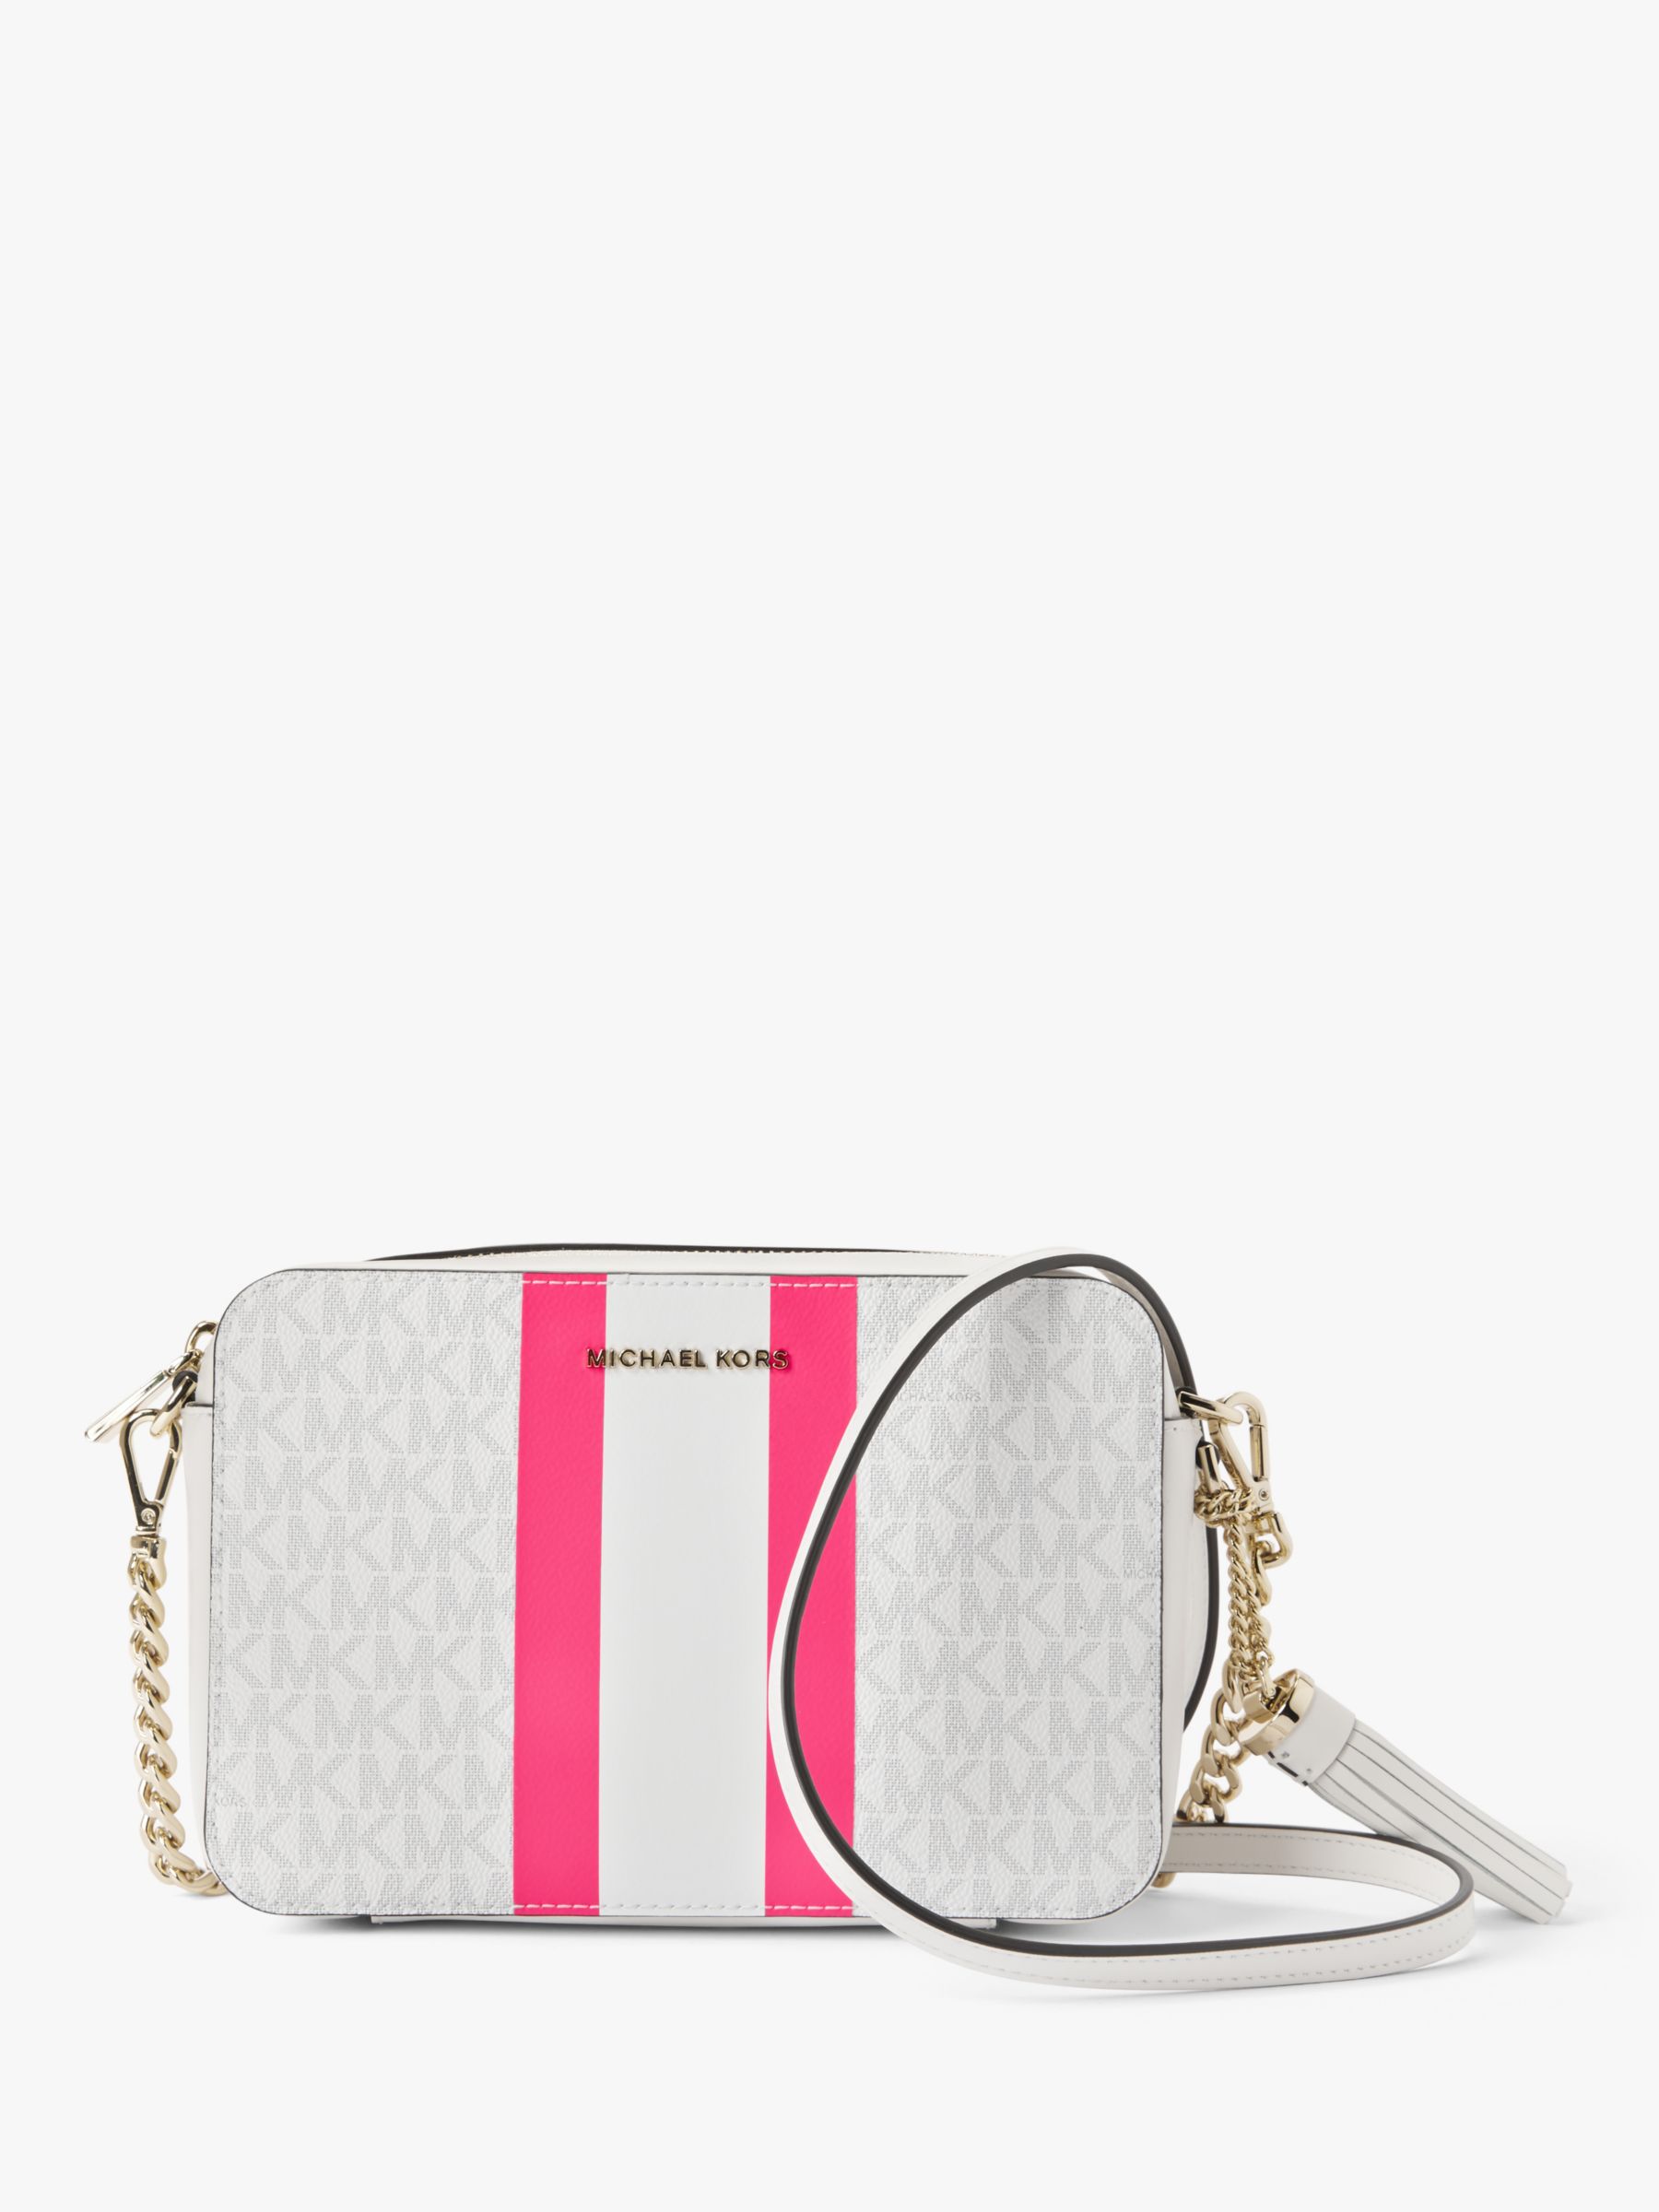 michael kors pink and white purse